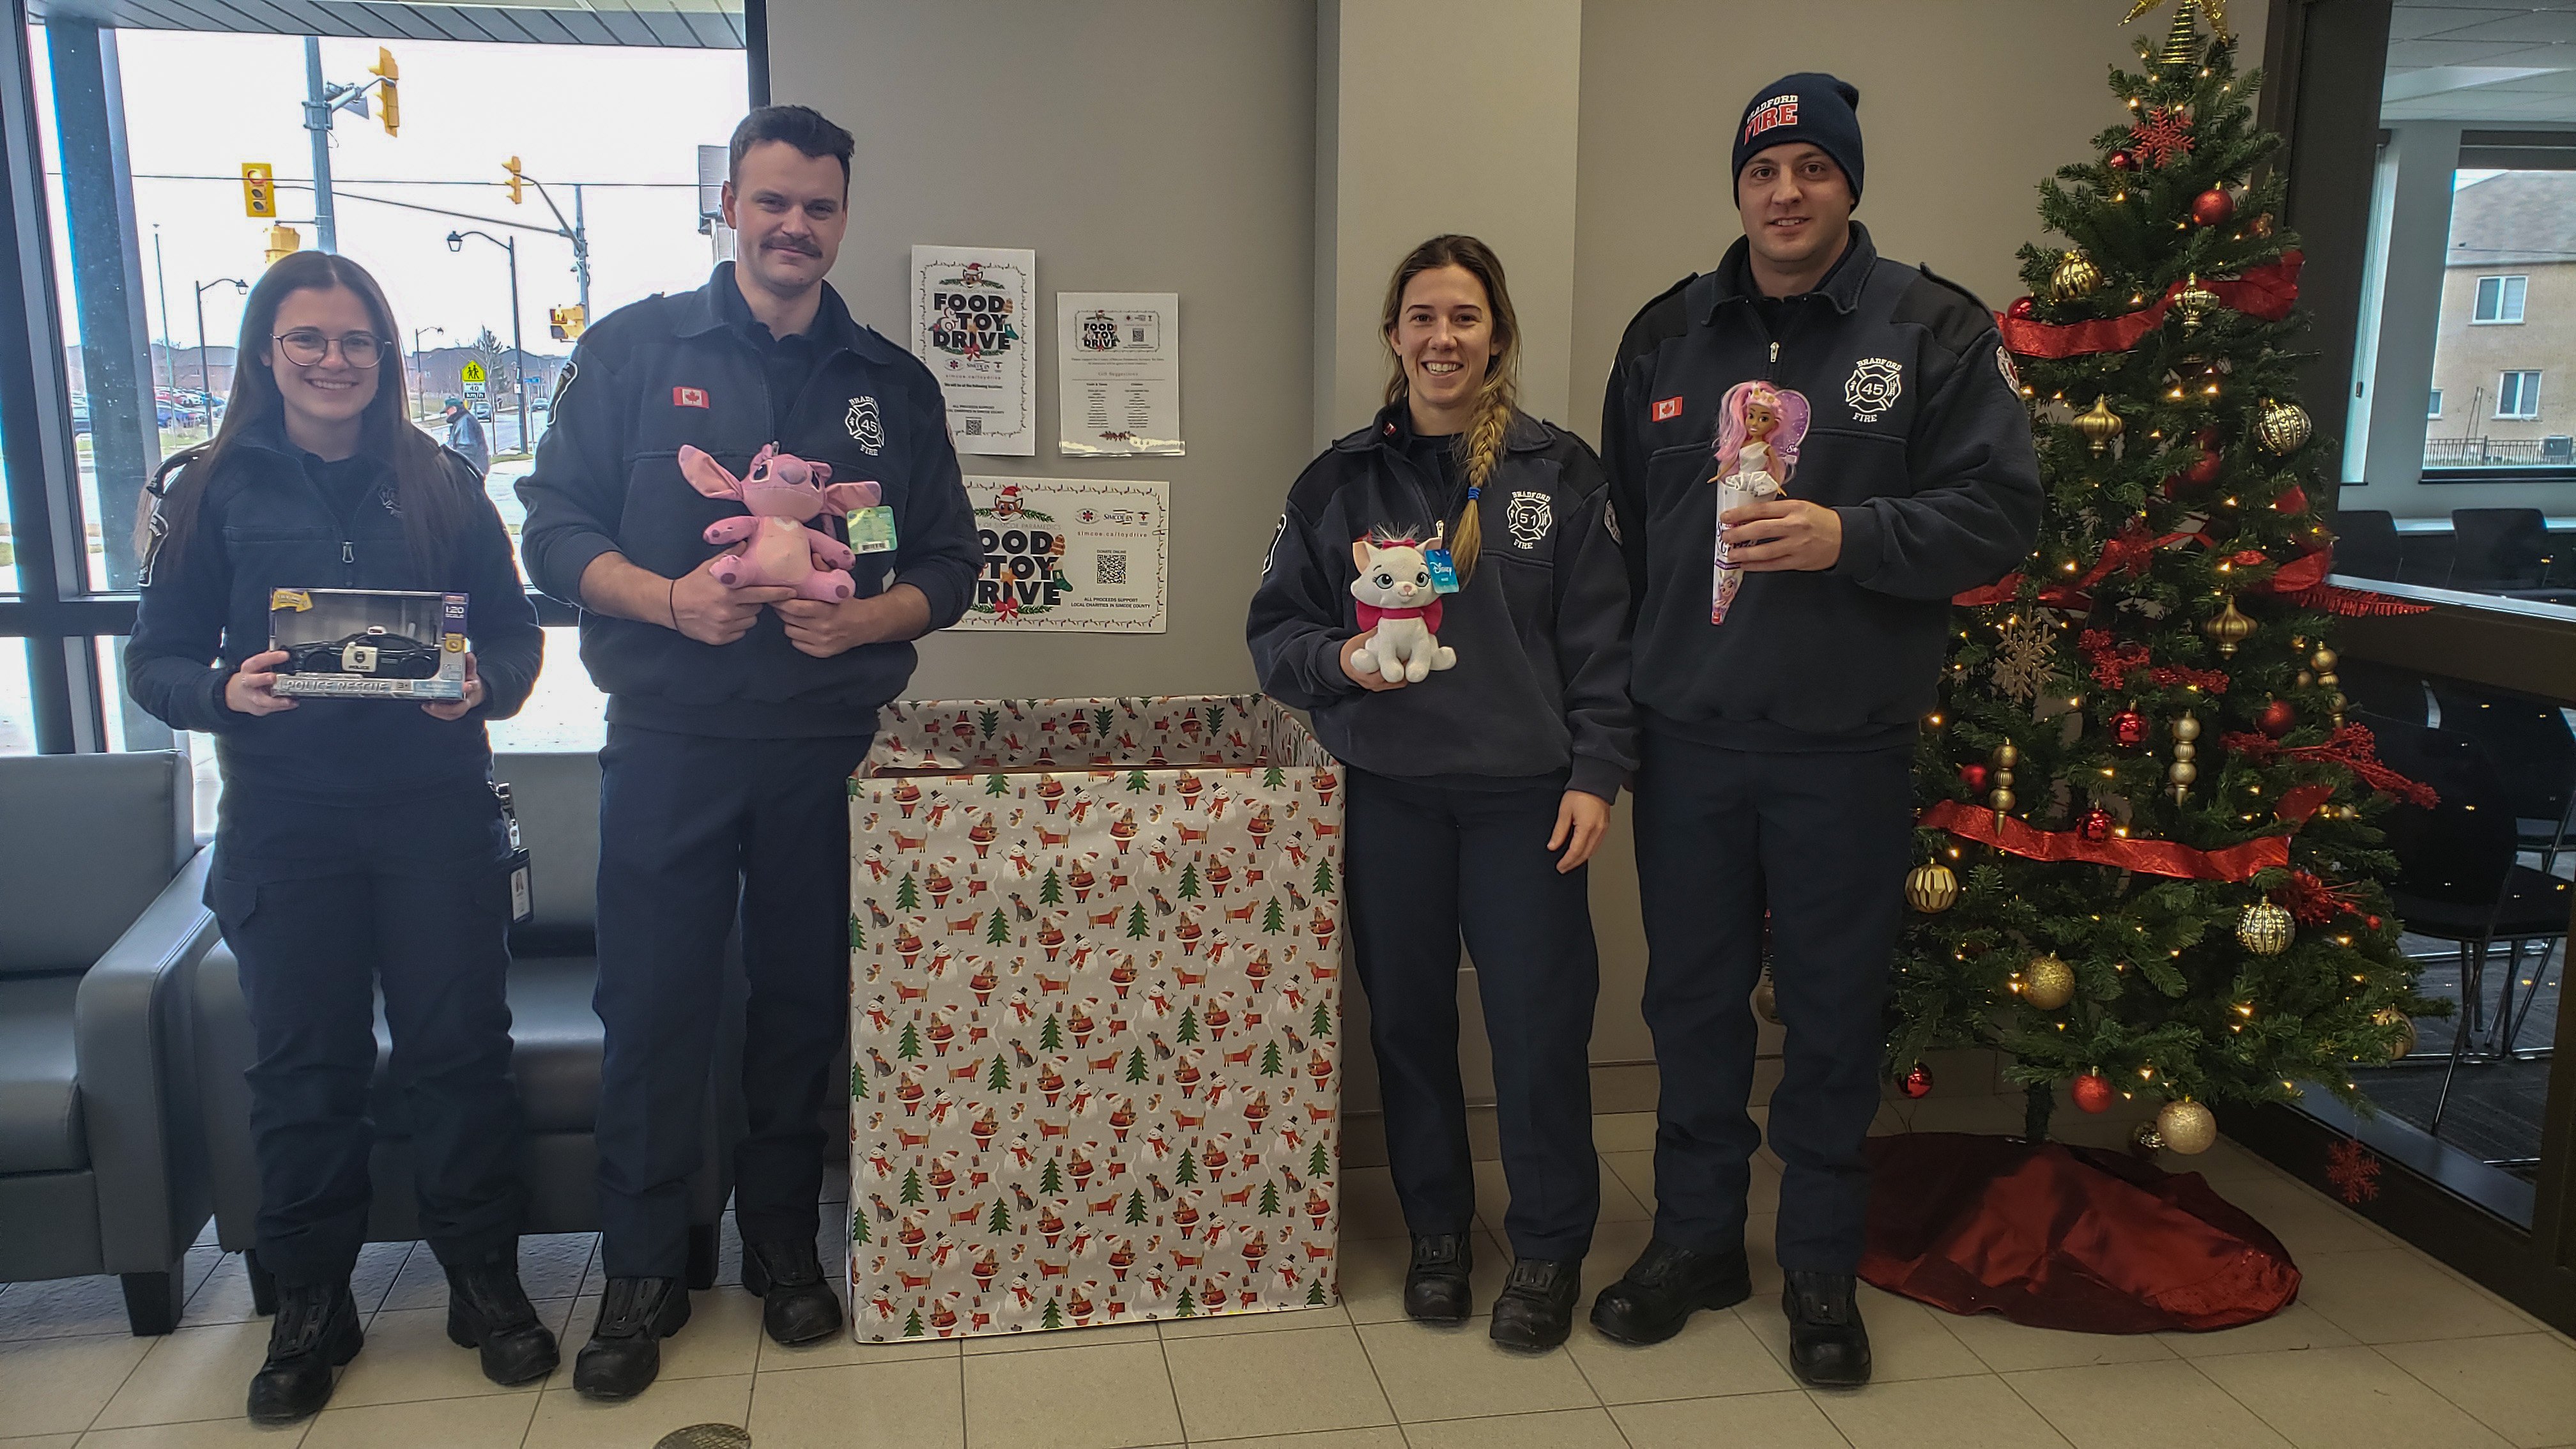 Four BWG Fire and Emergency Services workers smiling holding toys inside of the BWG Fire Hall standing beside a Christmas tree and toy box.